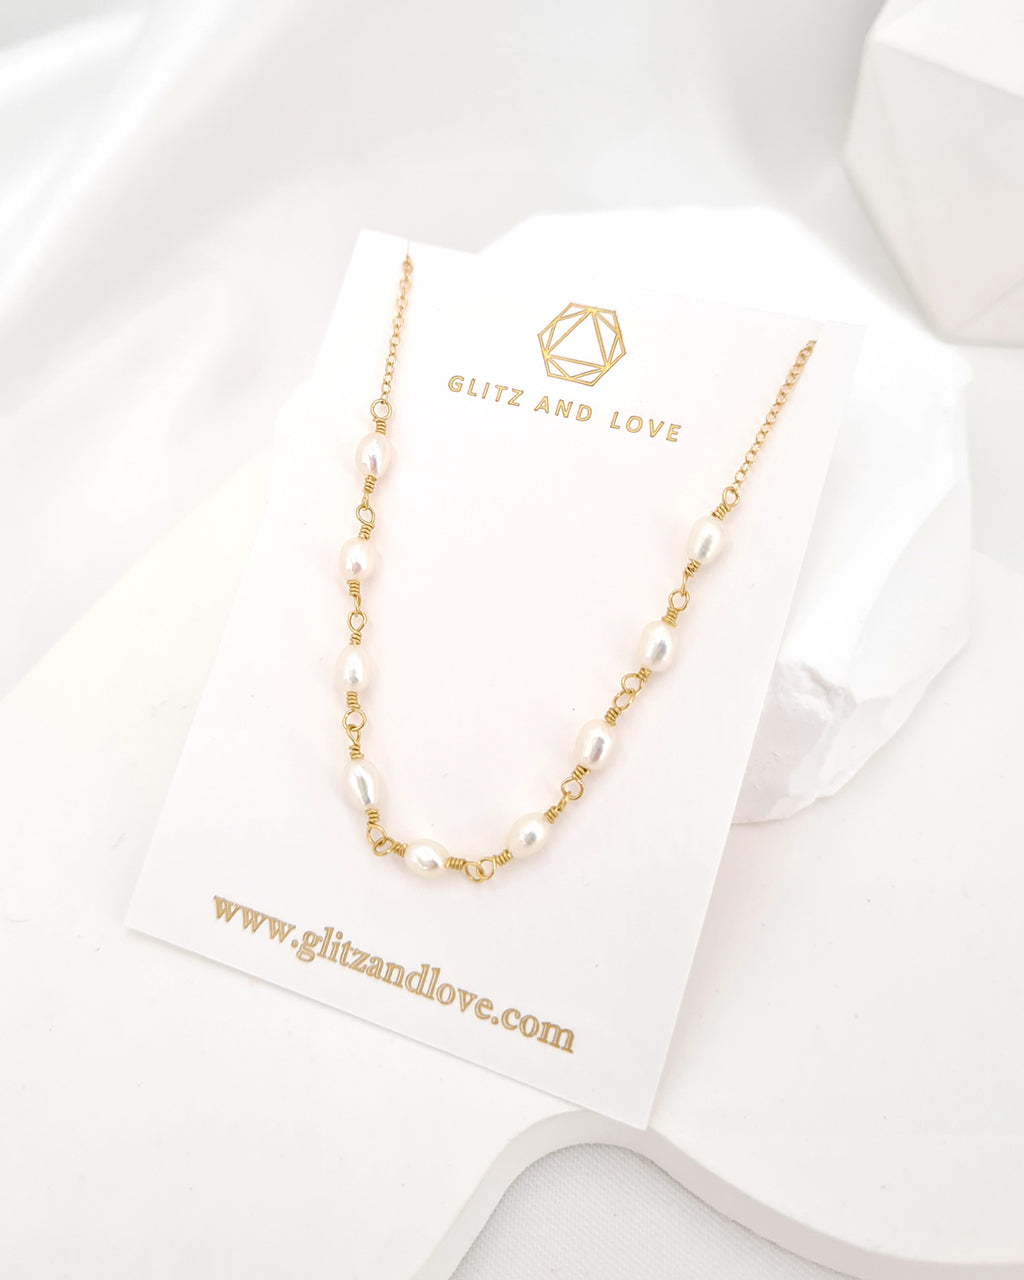 Tiny Pearl Long Earrings, Necklace and Bracelet, Freshwater Pearl Earrings 14k gold filled jewelry handmade in Singapore